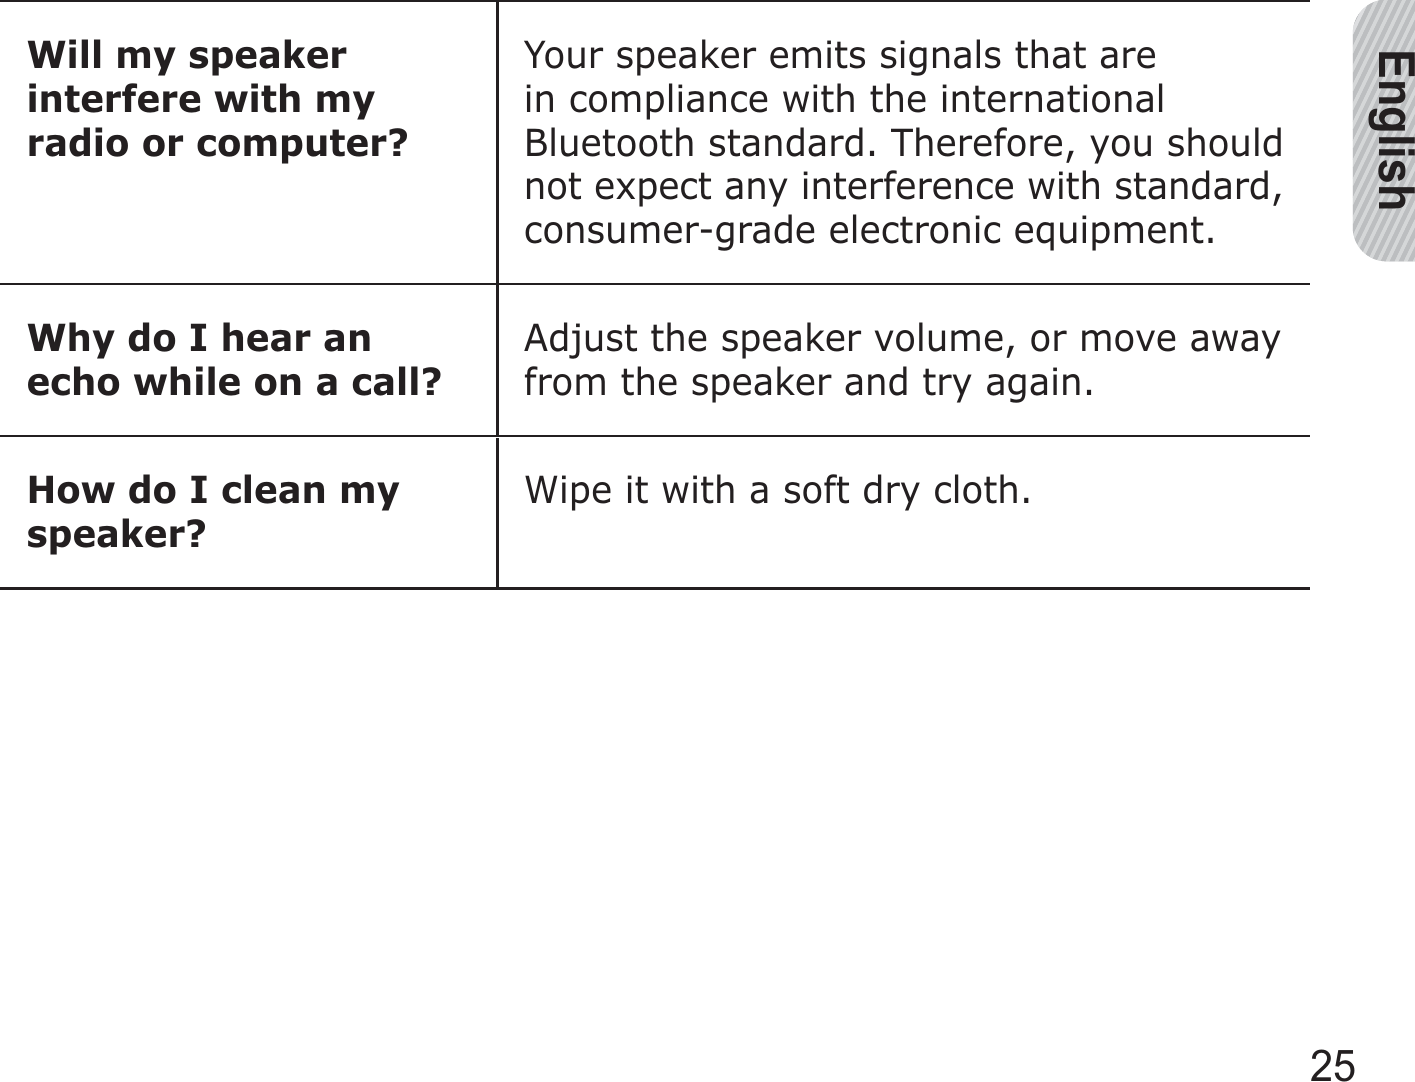 English25Will my speaker interfere with my radio or computer?Your speaker emits signals that are in compliance with the international Bluetooth standard. Therefore, you should not expect any interference with standard, consumer-grade electronic equipment.Why do I hear an echo while on a call?Adjust the speaker volume, or move away from the speaker and try again.How do I clean my speaker?Wipe it with a soft dry cloth.